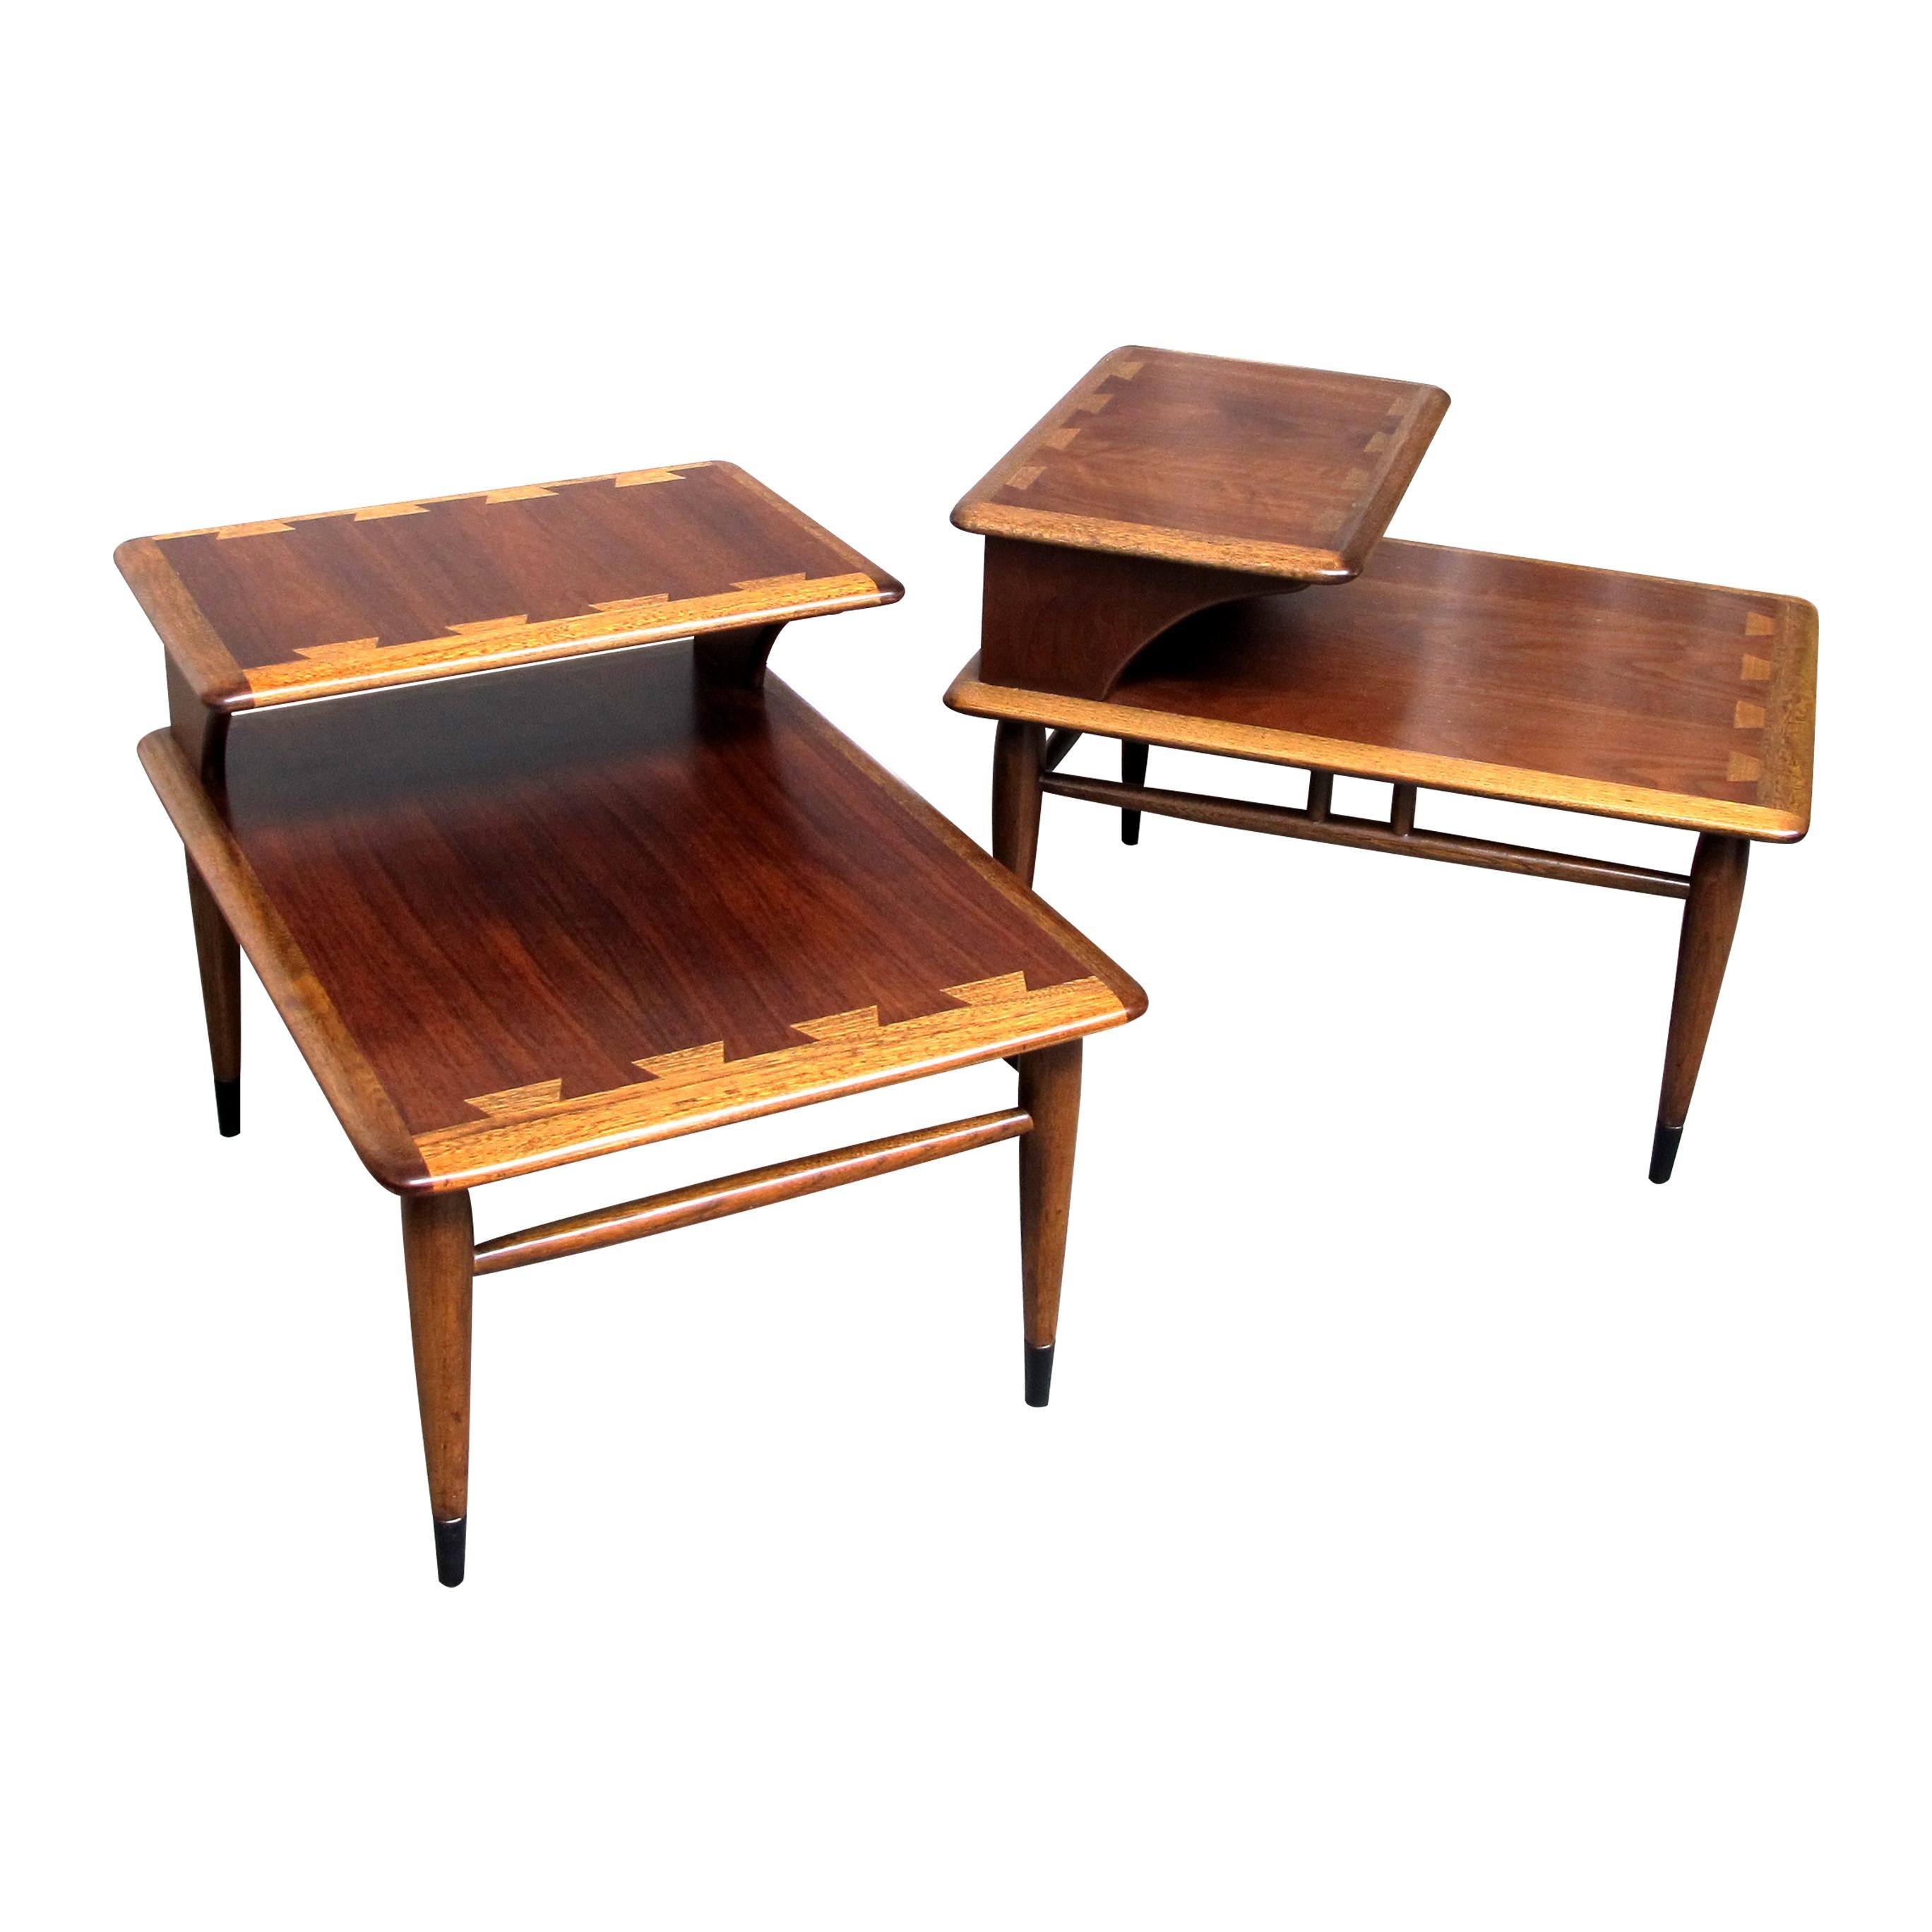 Crafted in the 1960s by Lane in America, these tables are a stunning addition to any space, boasting great craftsmanship and attention to detail. Versatility is at the core of these side tables' design. While they are a perfect choice as side